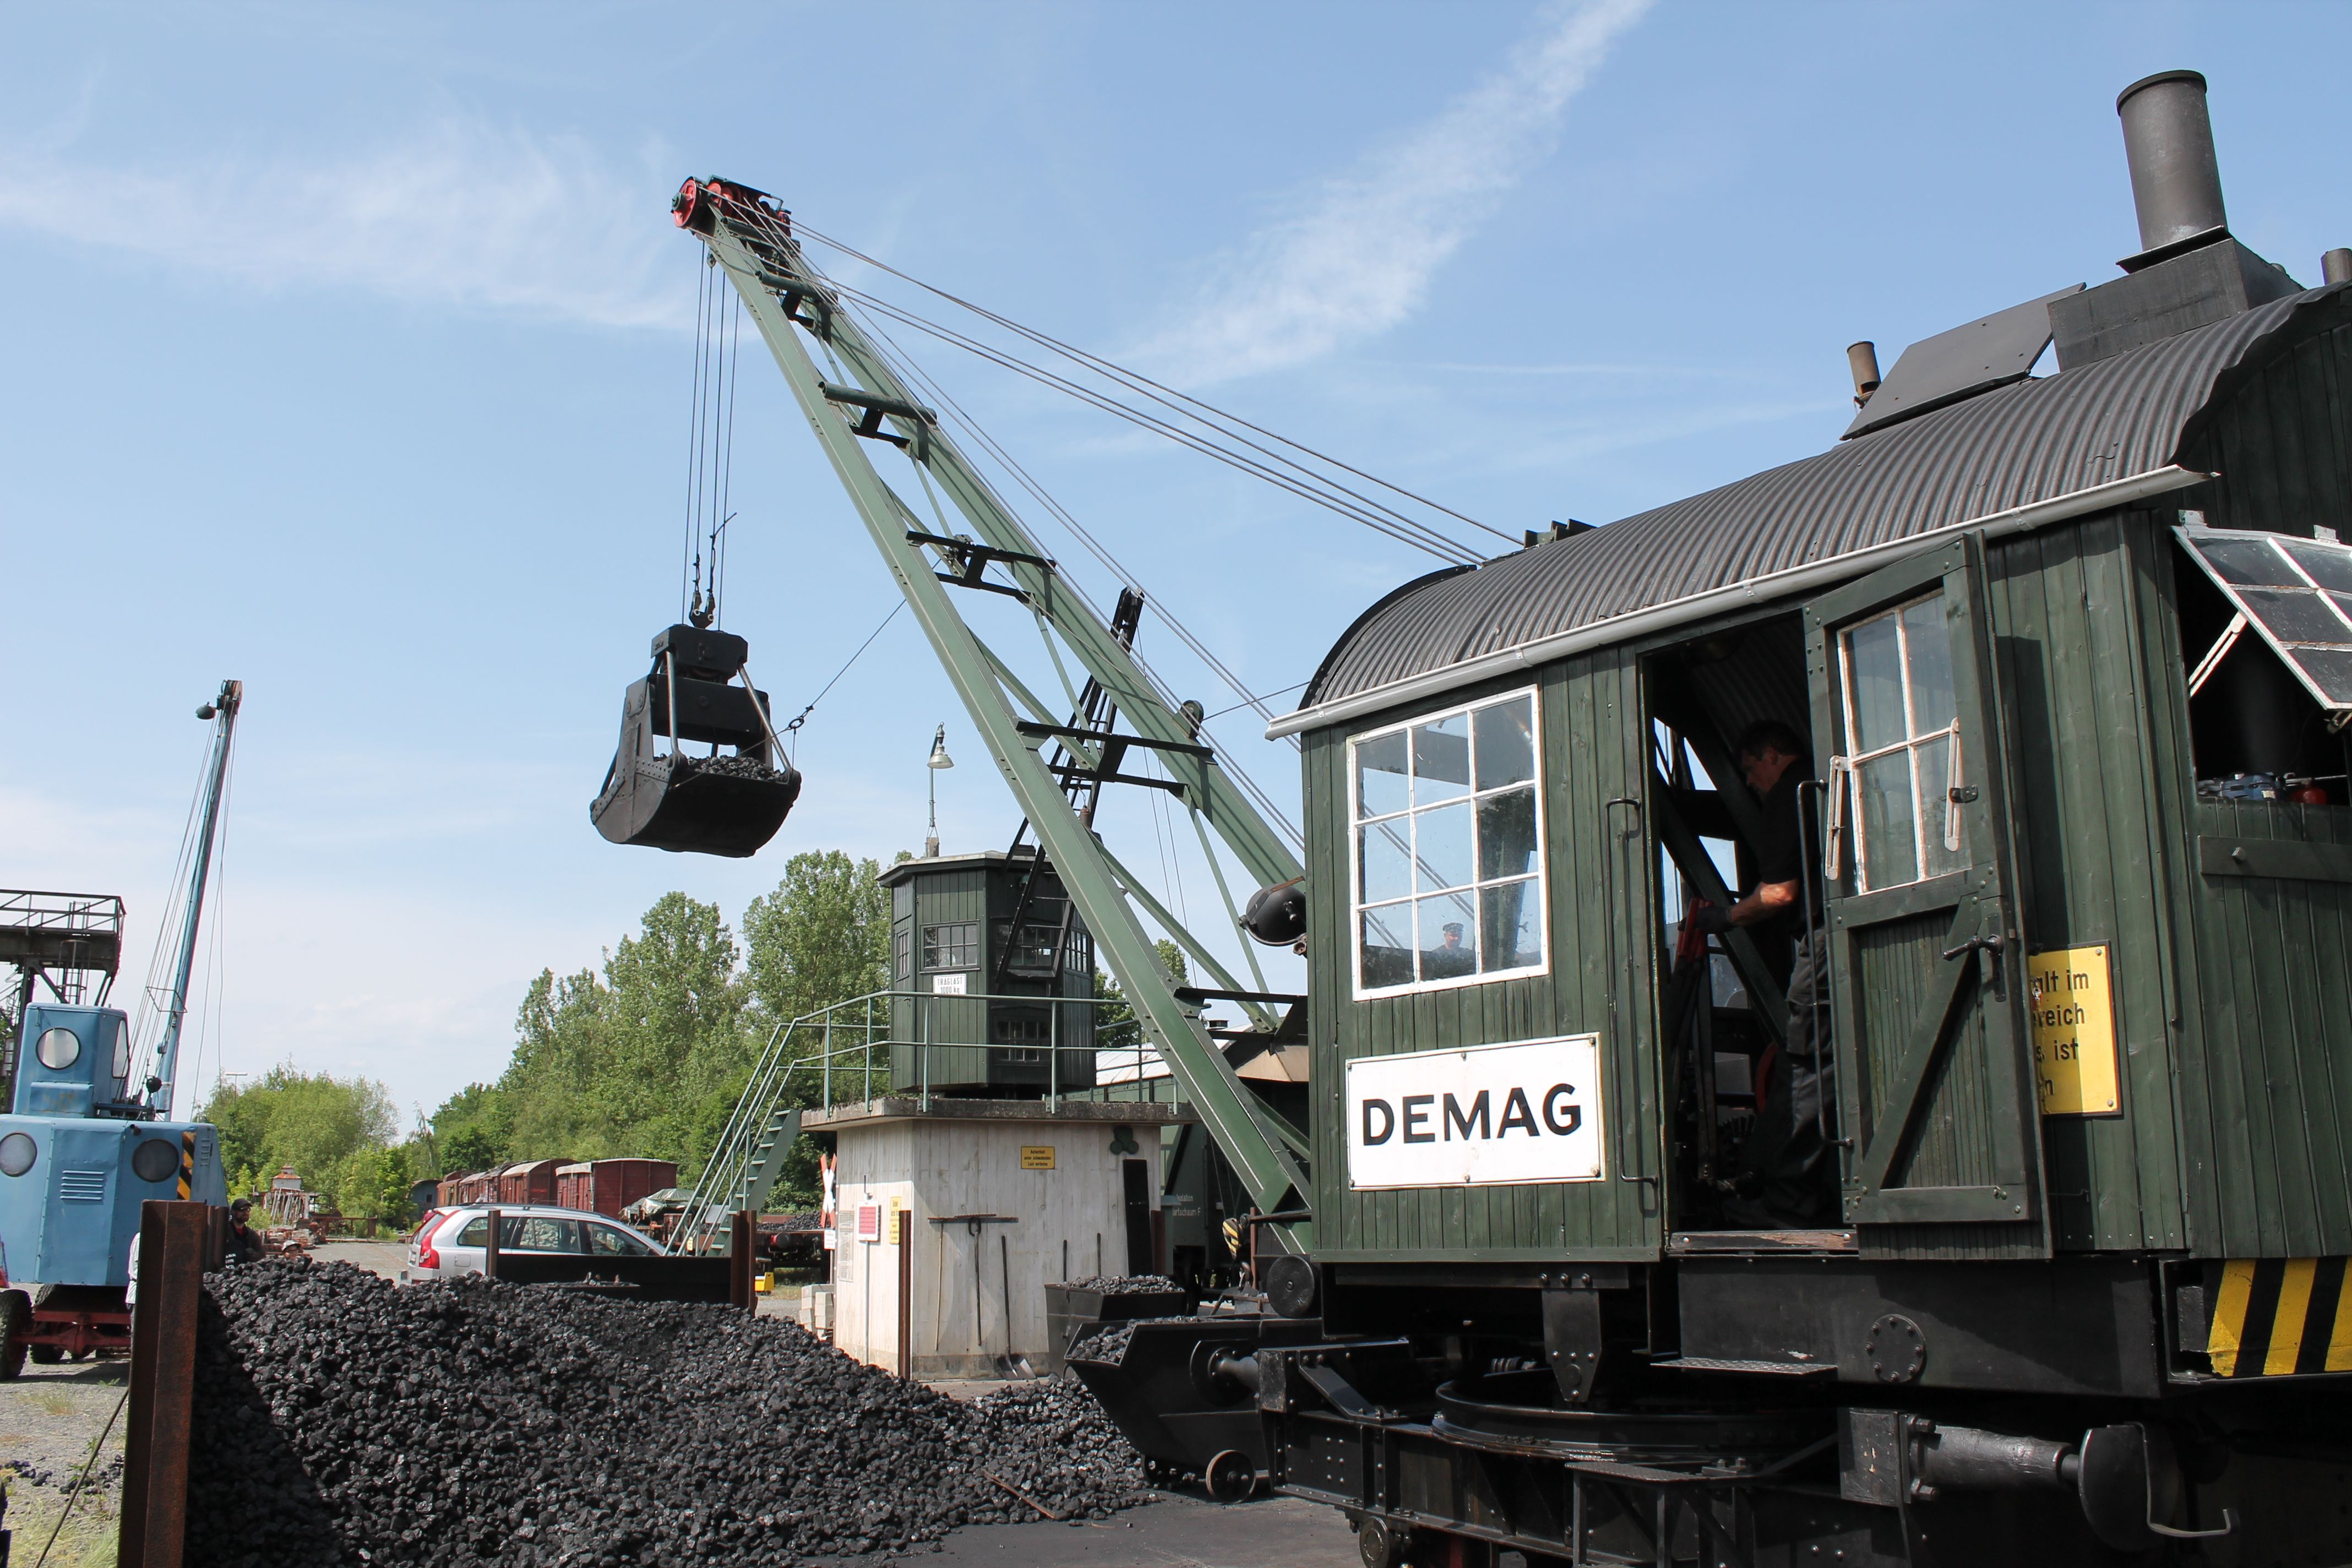 A green steam crane lifting lumps of coal from a pile with a shovel